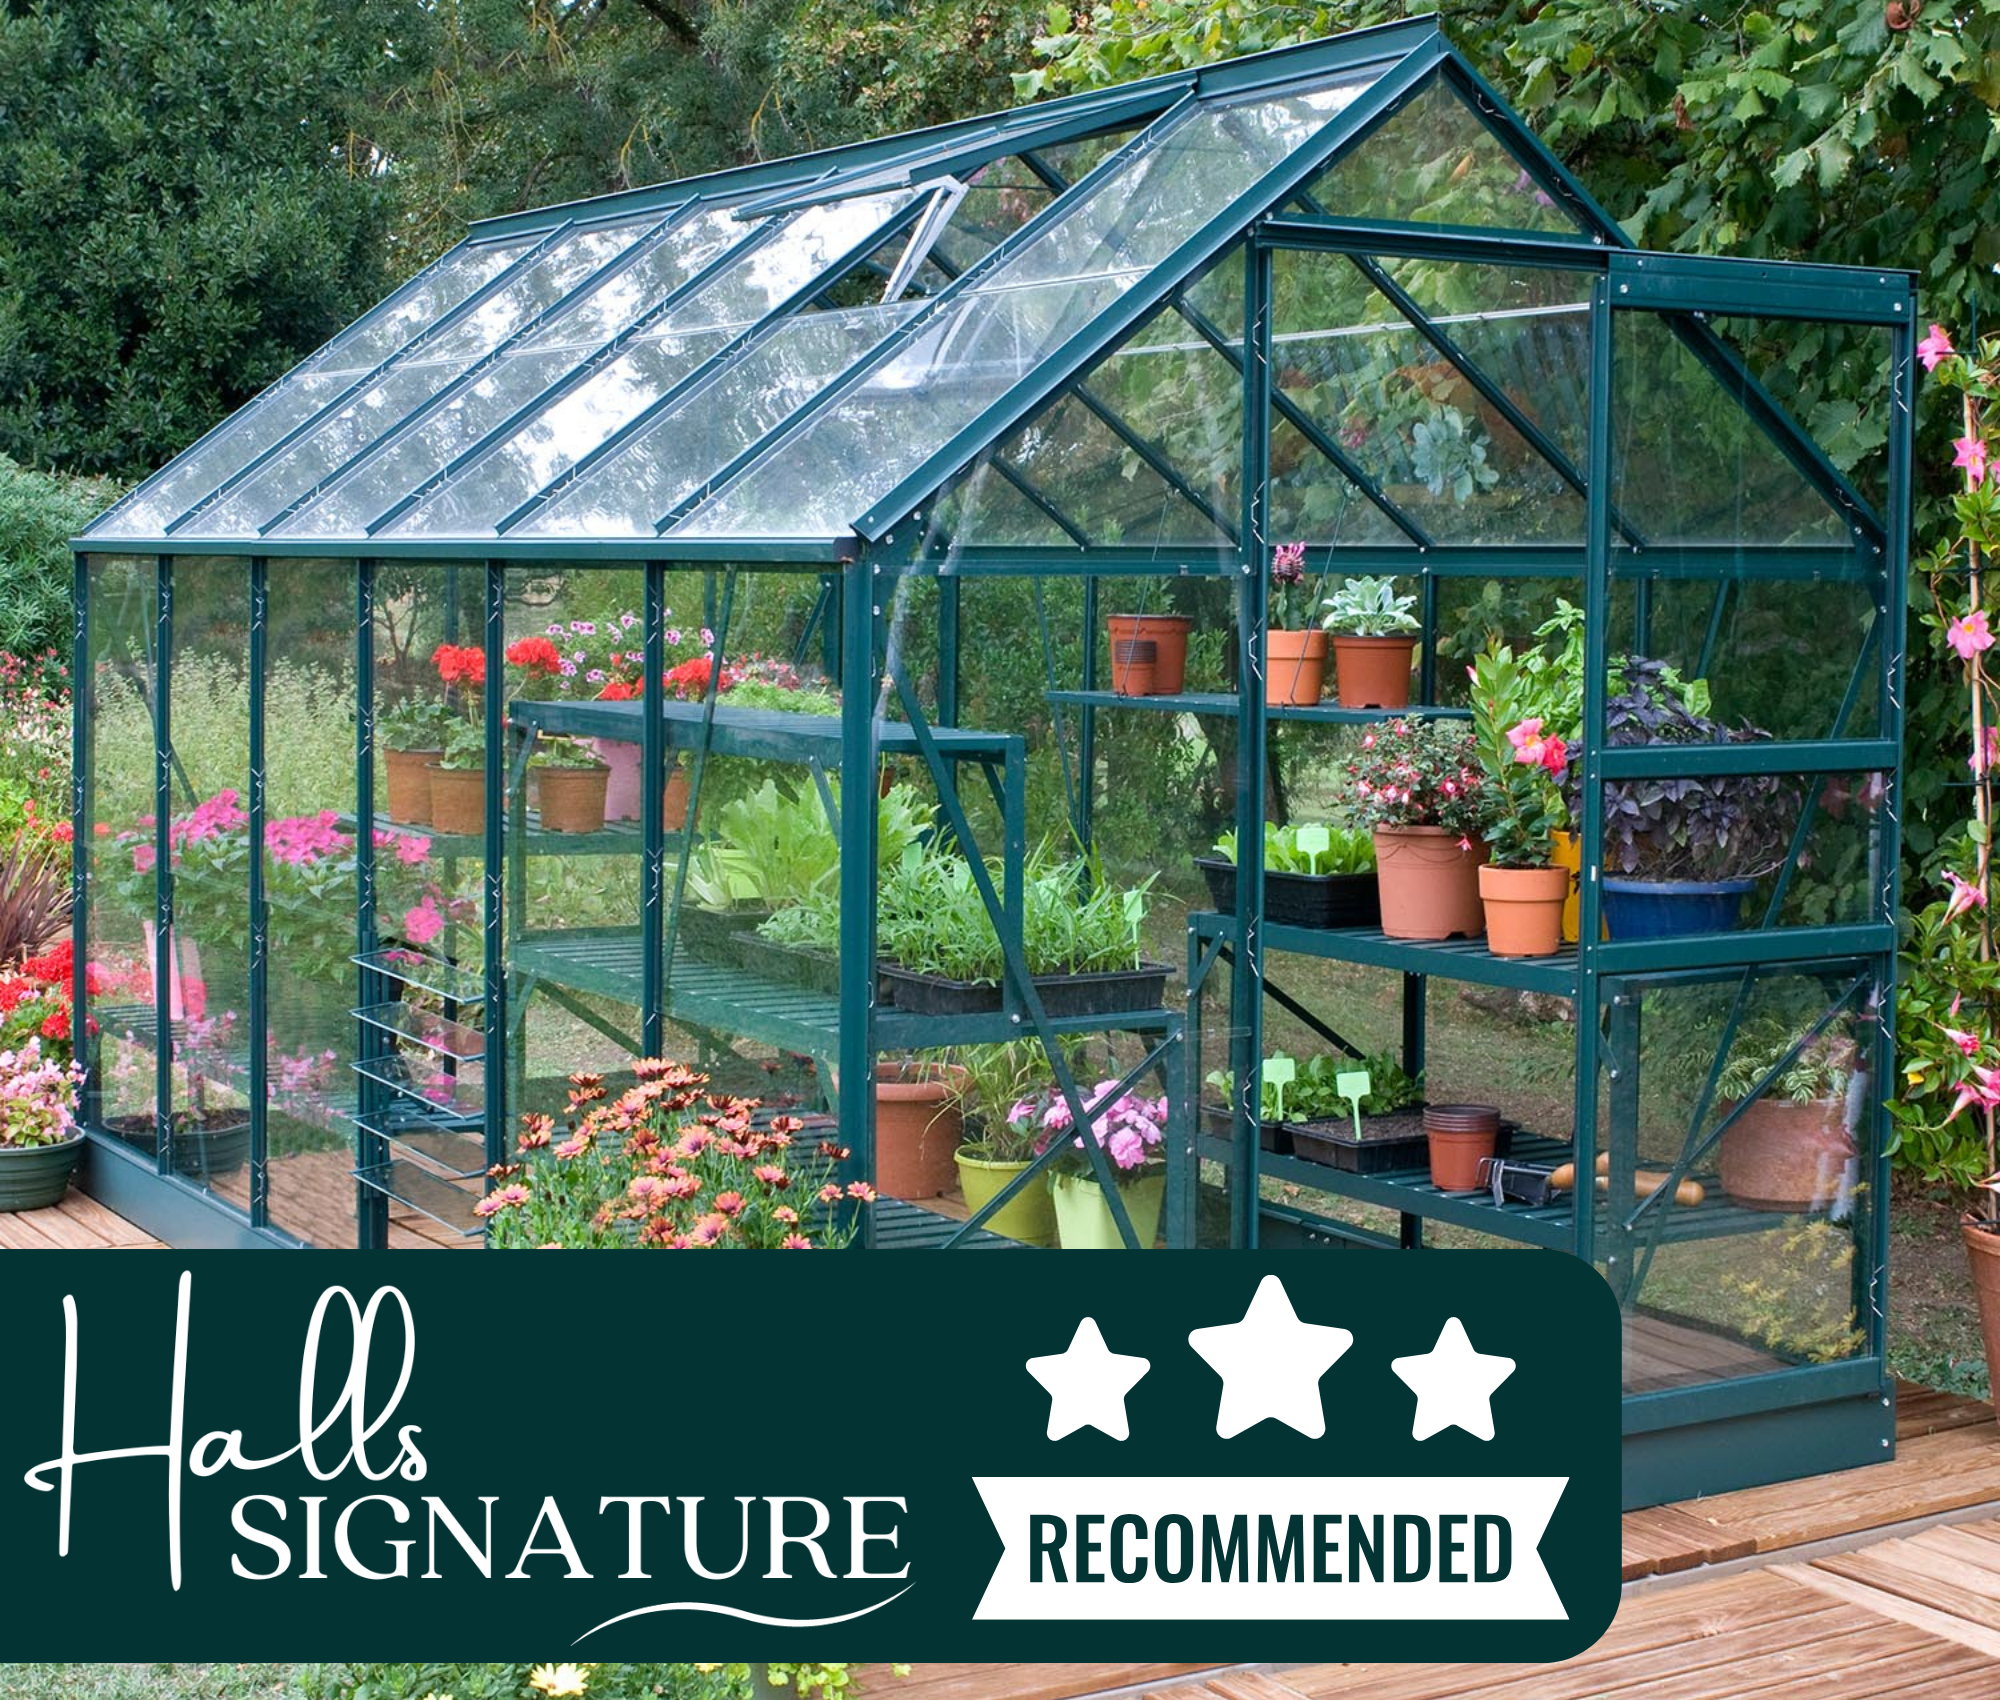 Halls signature greenhouse range, recommended greenhouse brand by GardenSite.